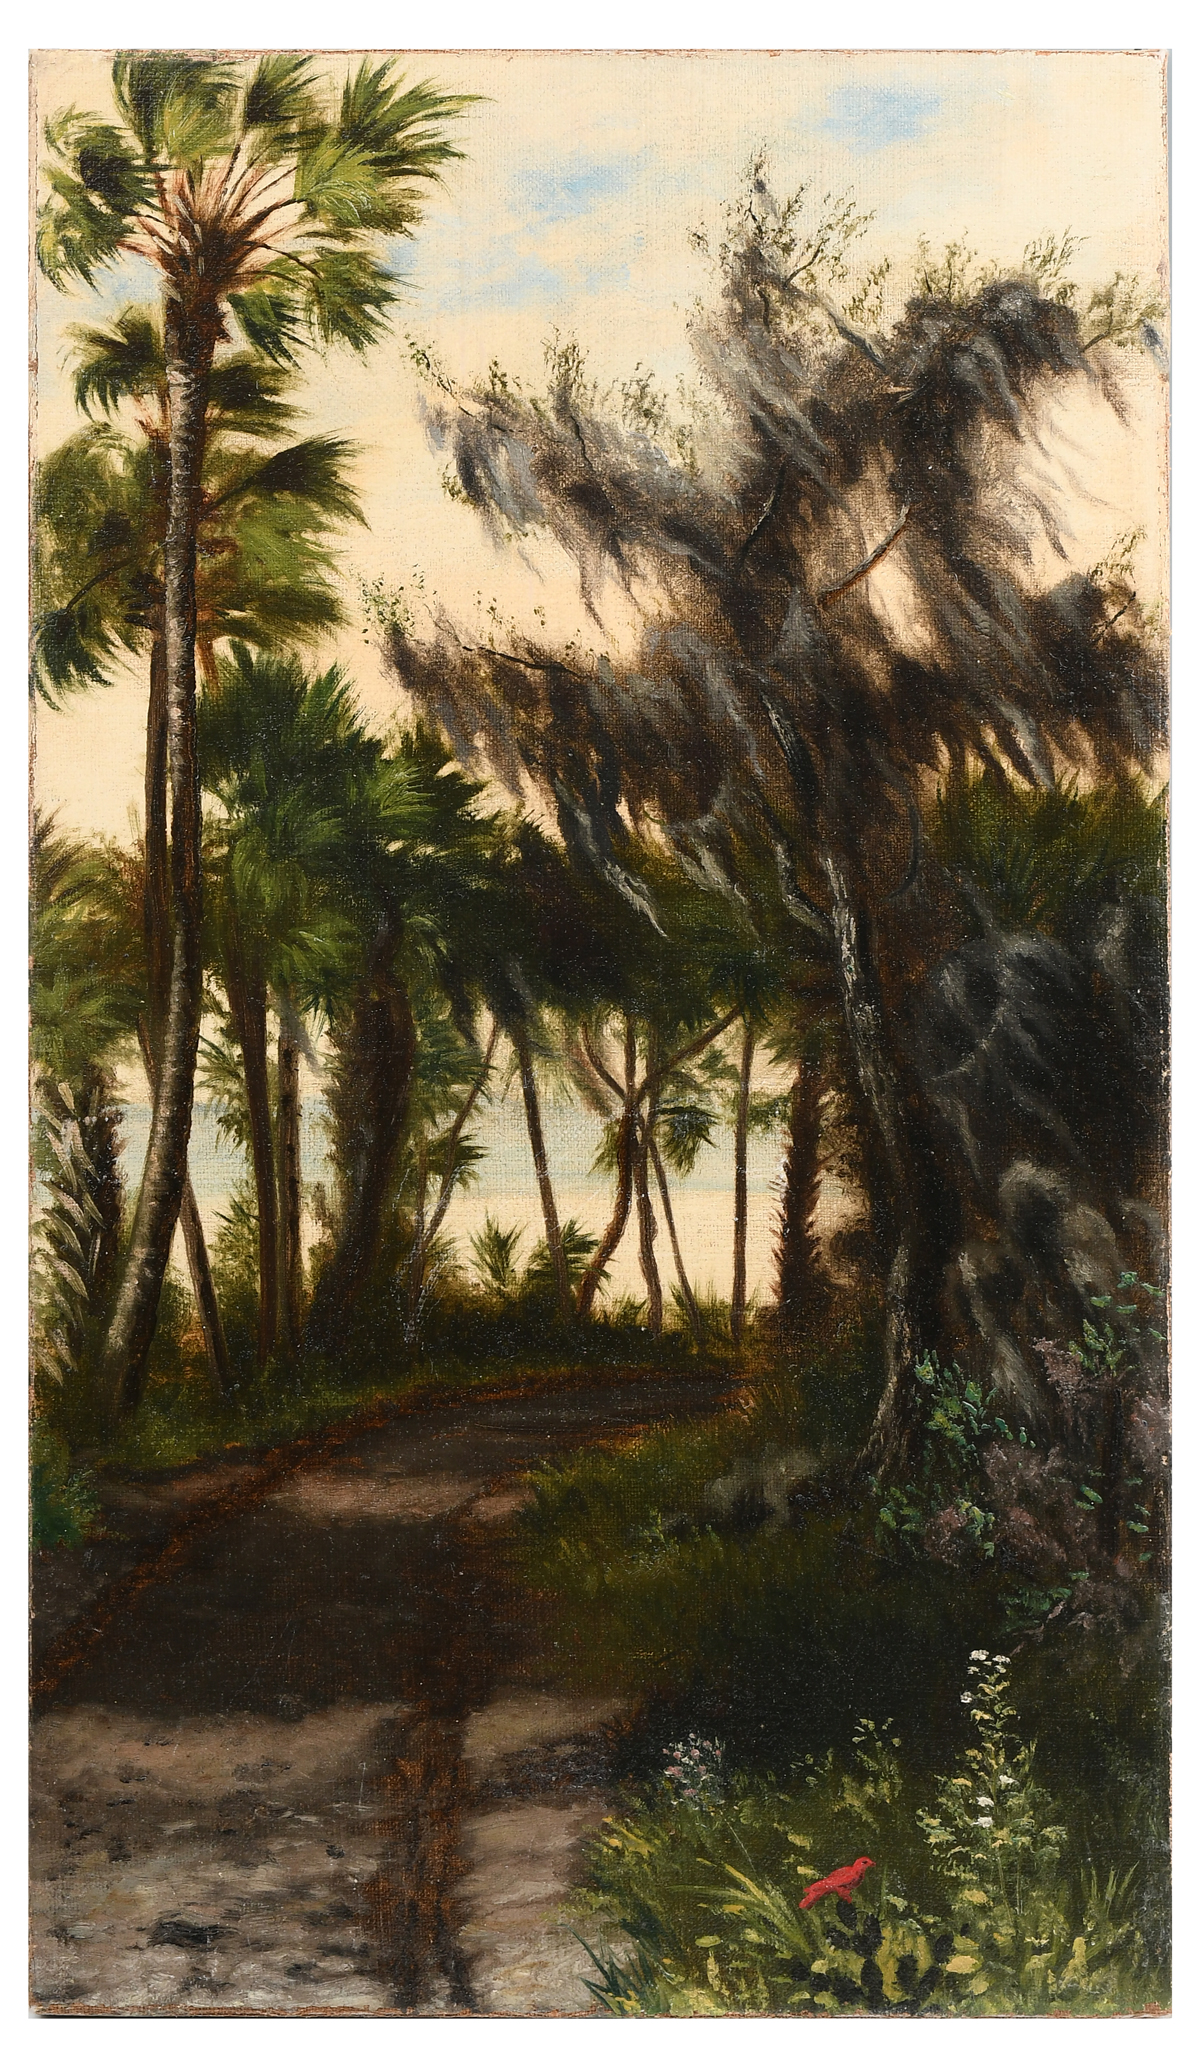 EARLY UNSIGNED FLORIDA LANDSCAPE